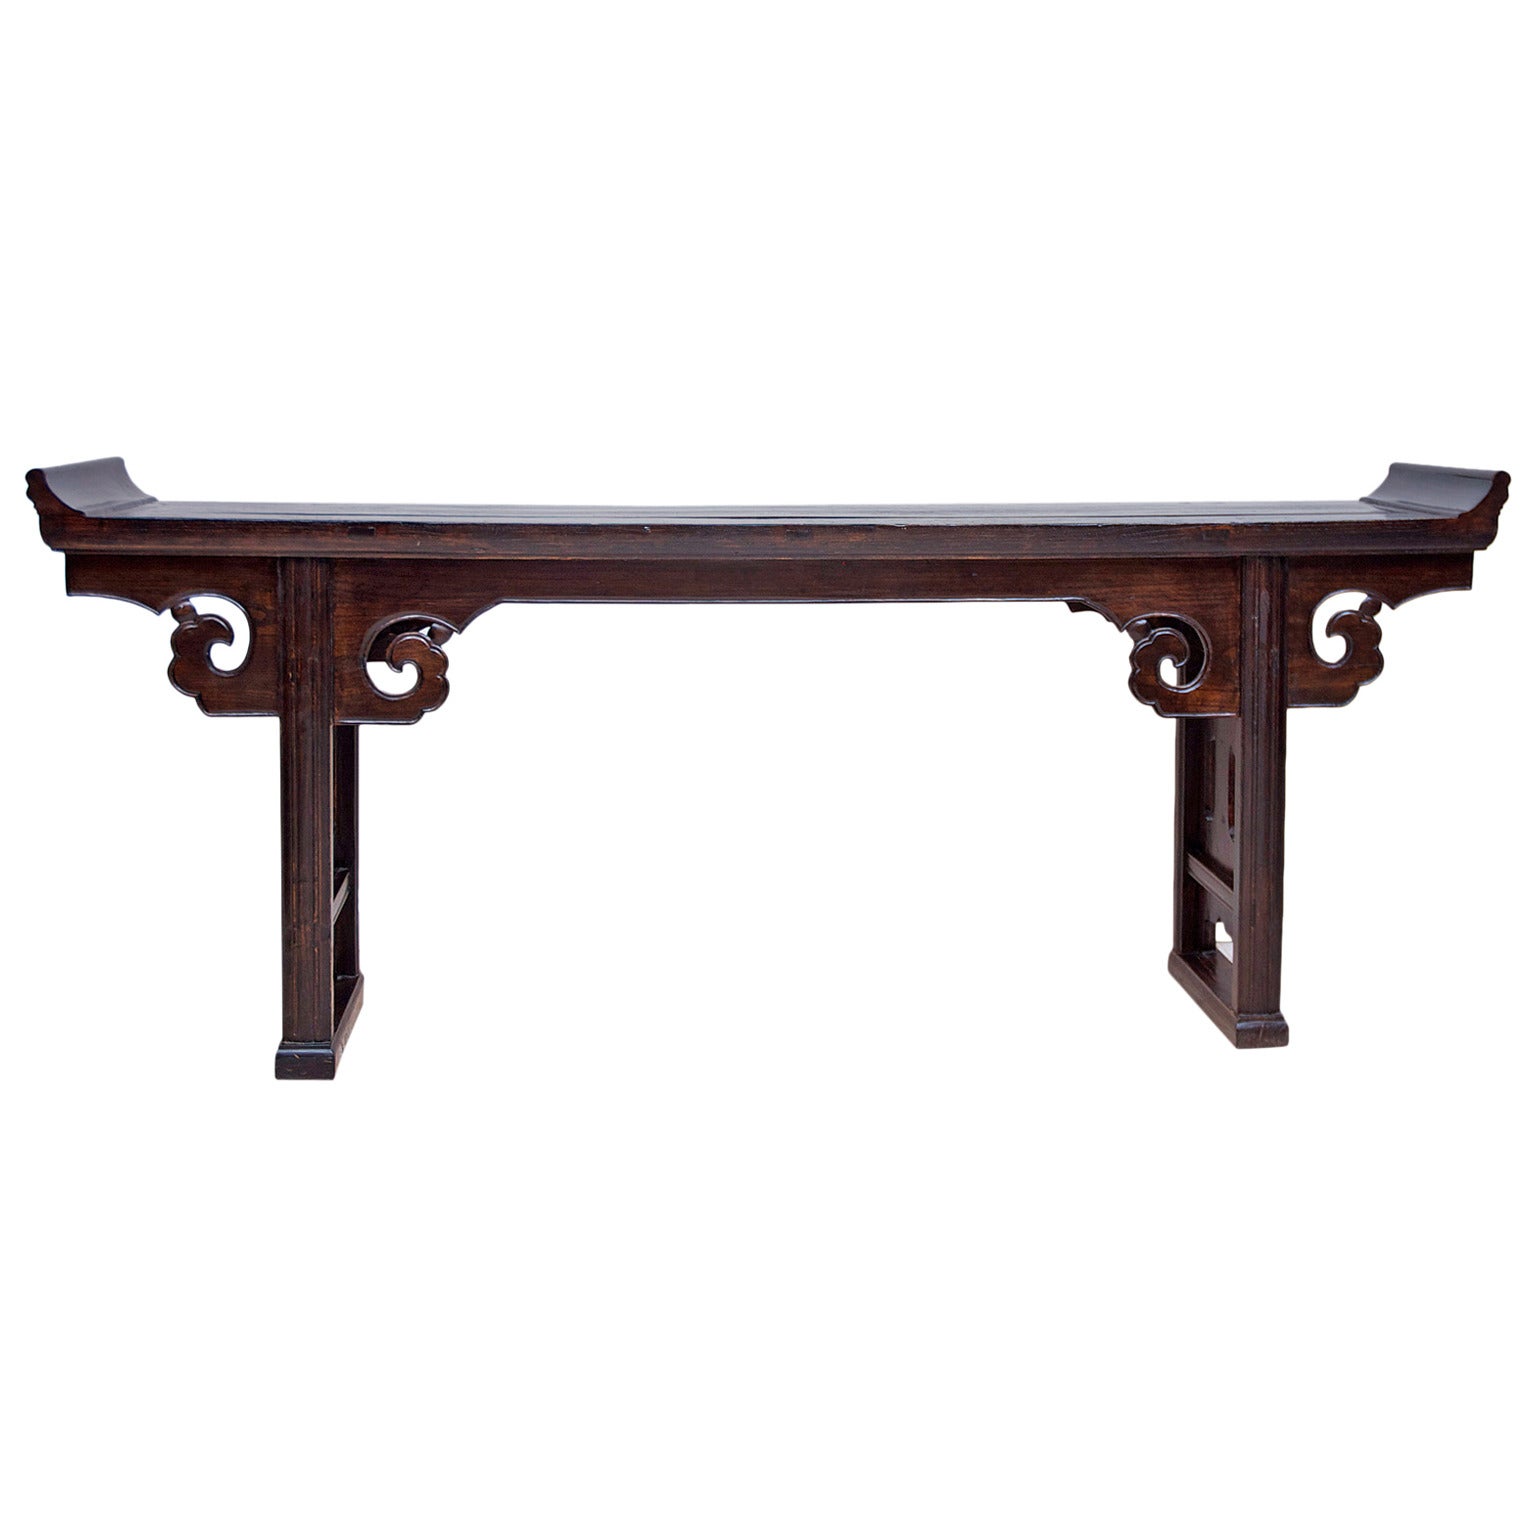 A long elmwood altar or console table with everted flanges or 'qiaotou' (commonly called 